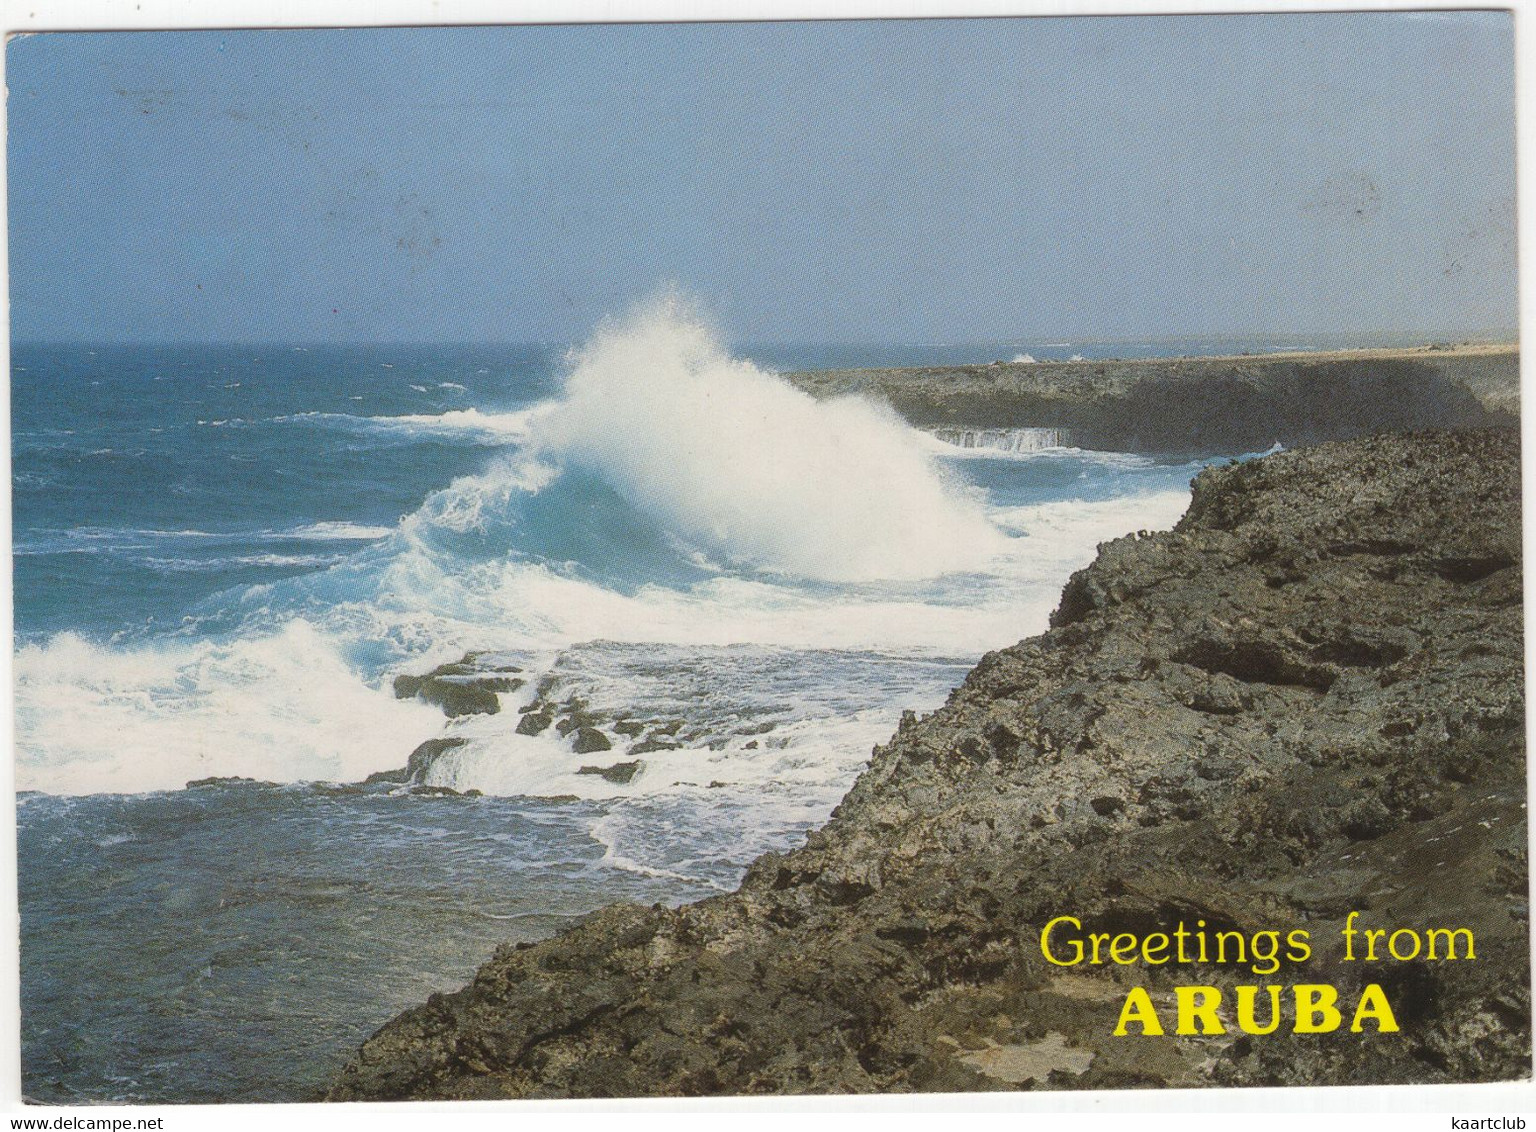 Aruba - The Rough North Shore That Changes Every Second - Aruba